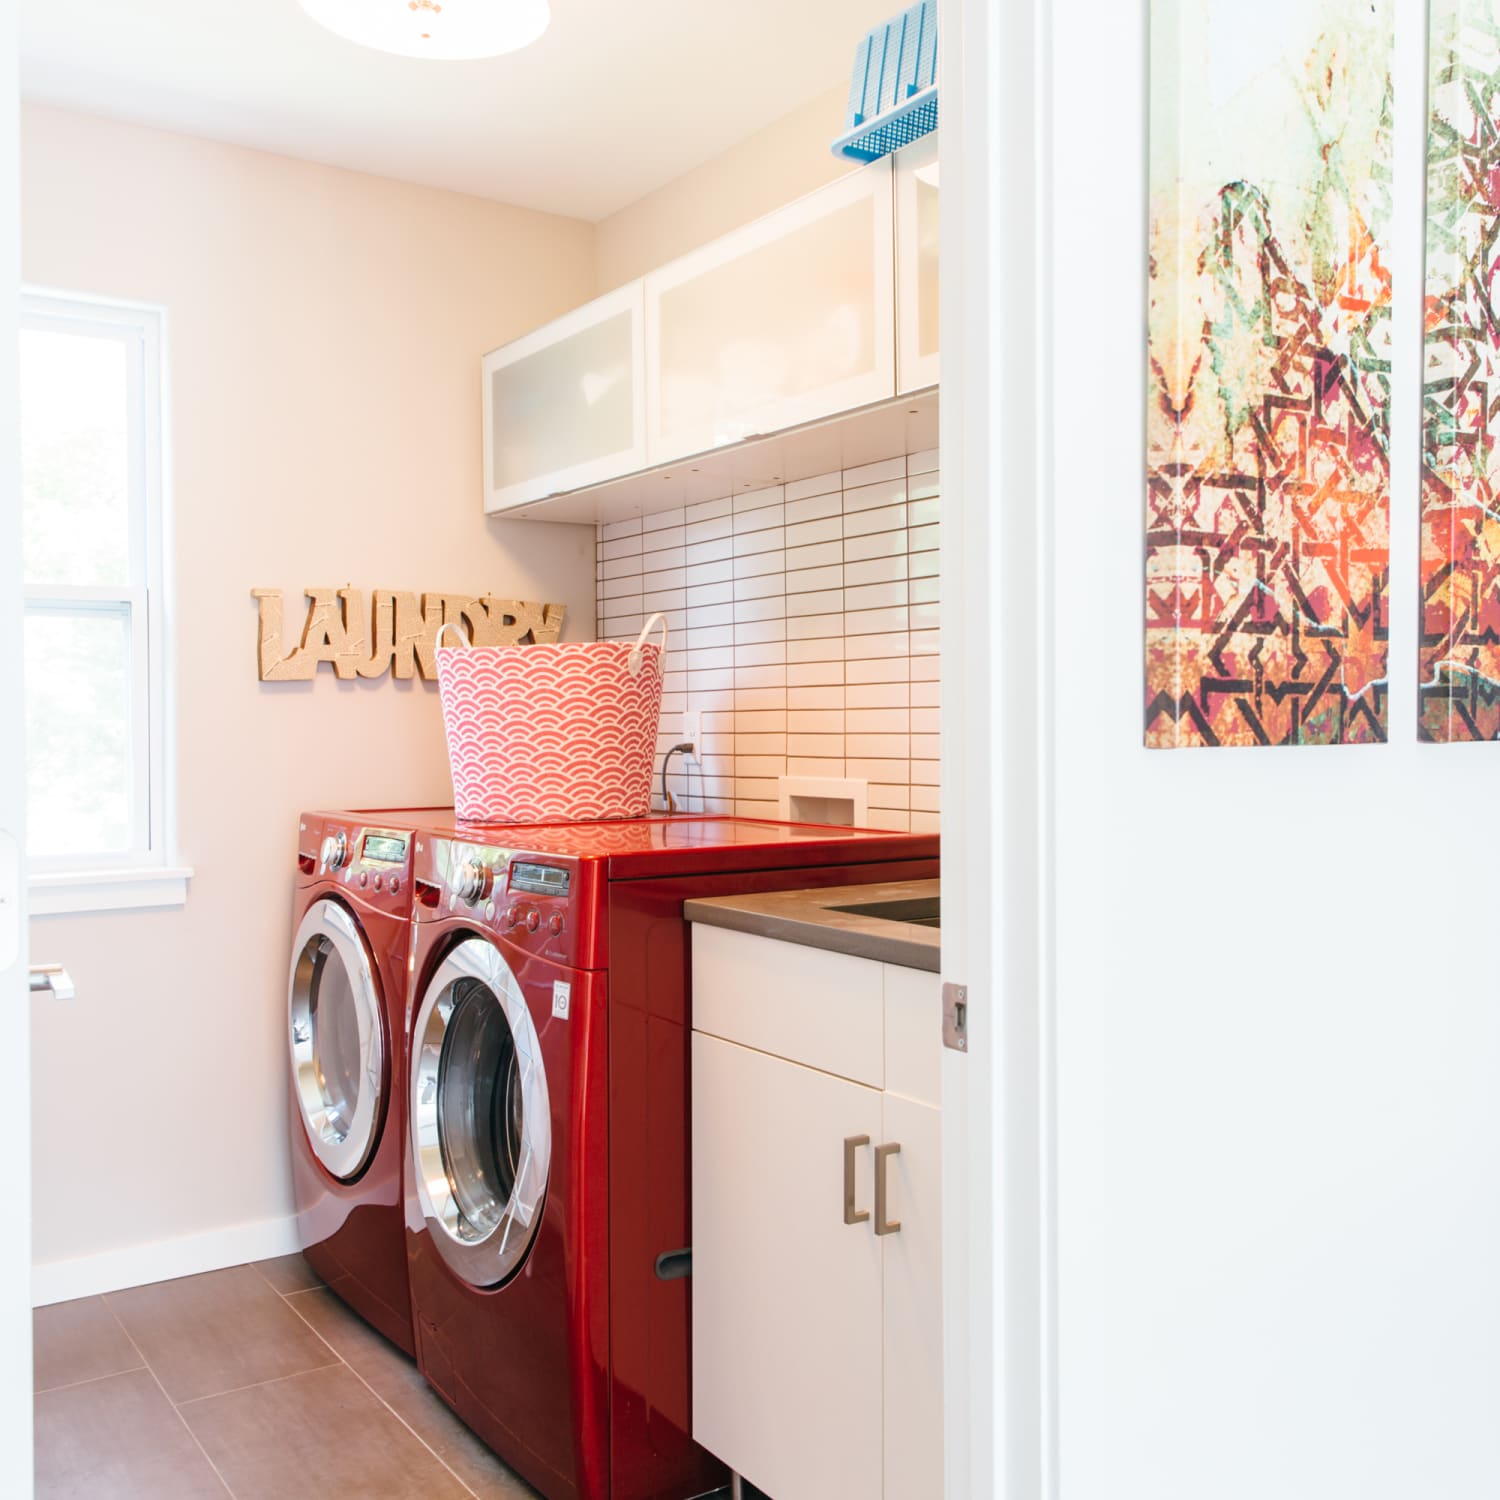 Laundry Room Organization Ideas - Clever Housewife